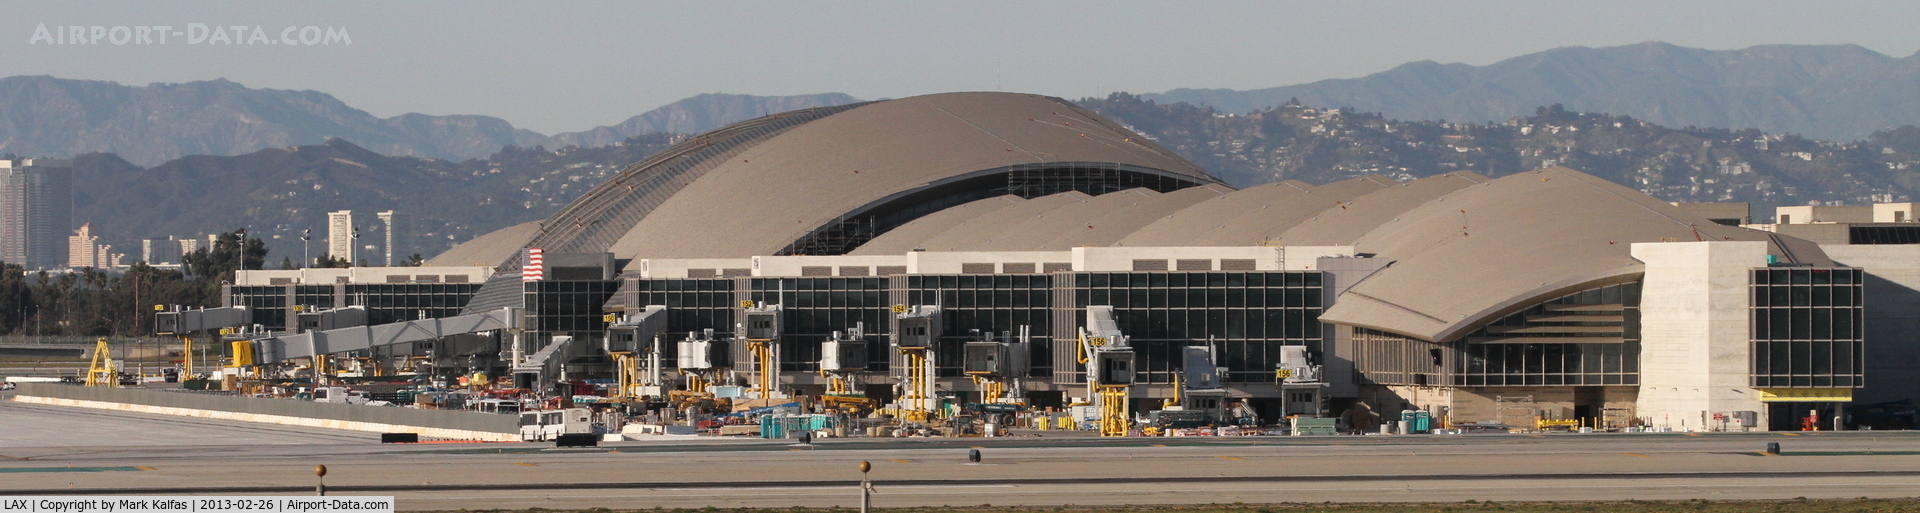 Los Angeles International Airport (LAX) - Tom Bradley International Terminal in the final phase of construction.